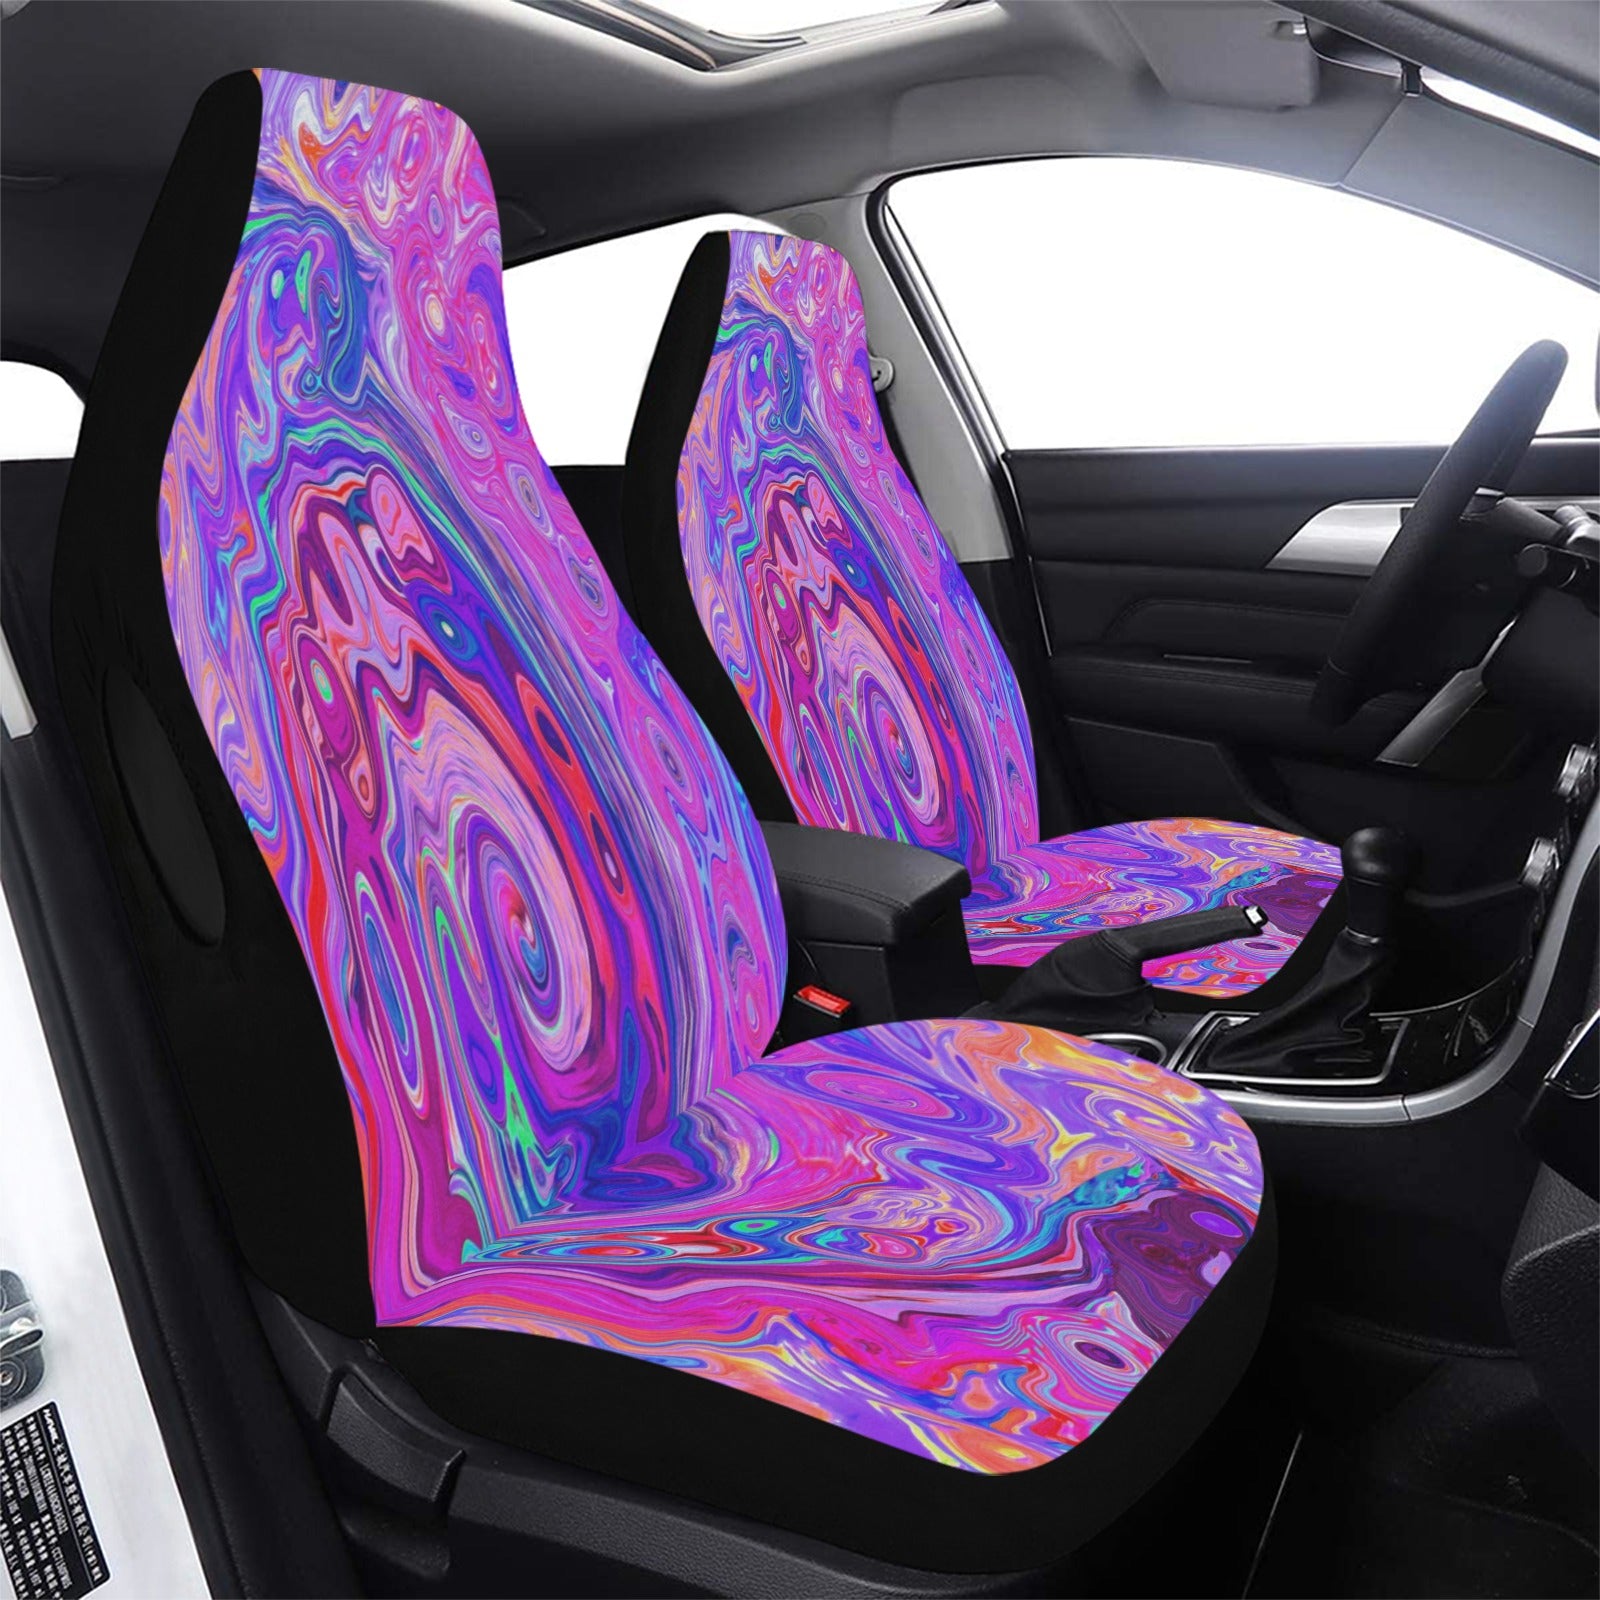 Colorful Car Seat Covers, Retro Purple and Orange Abstract Groovy Swirl